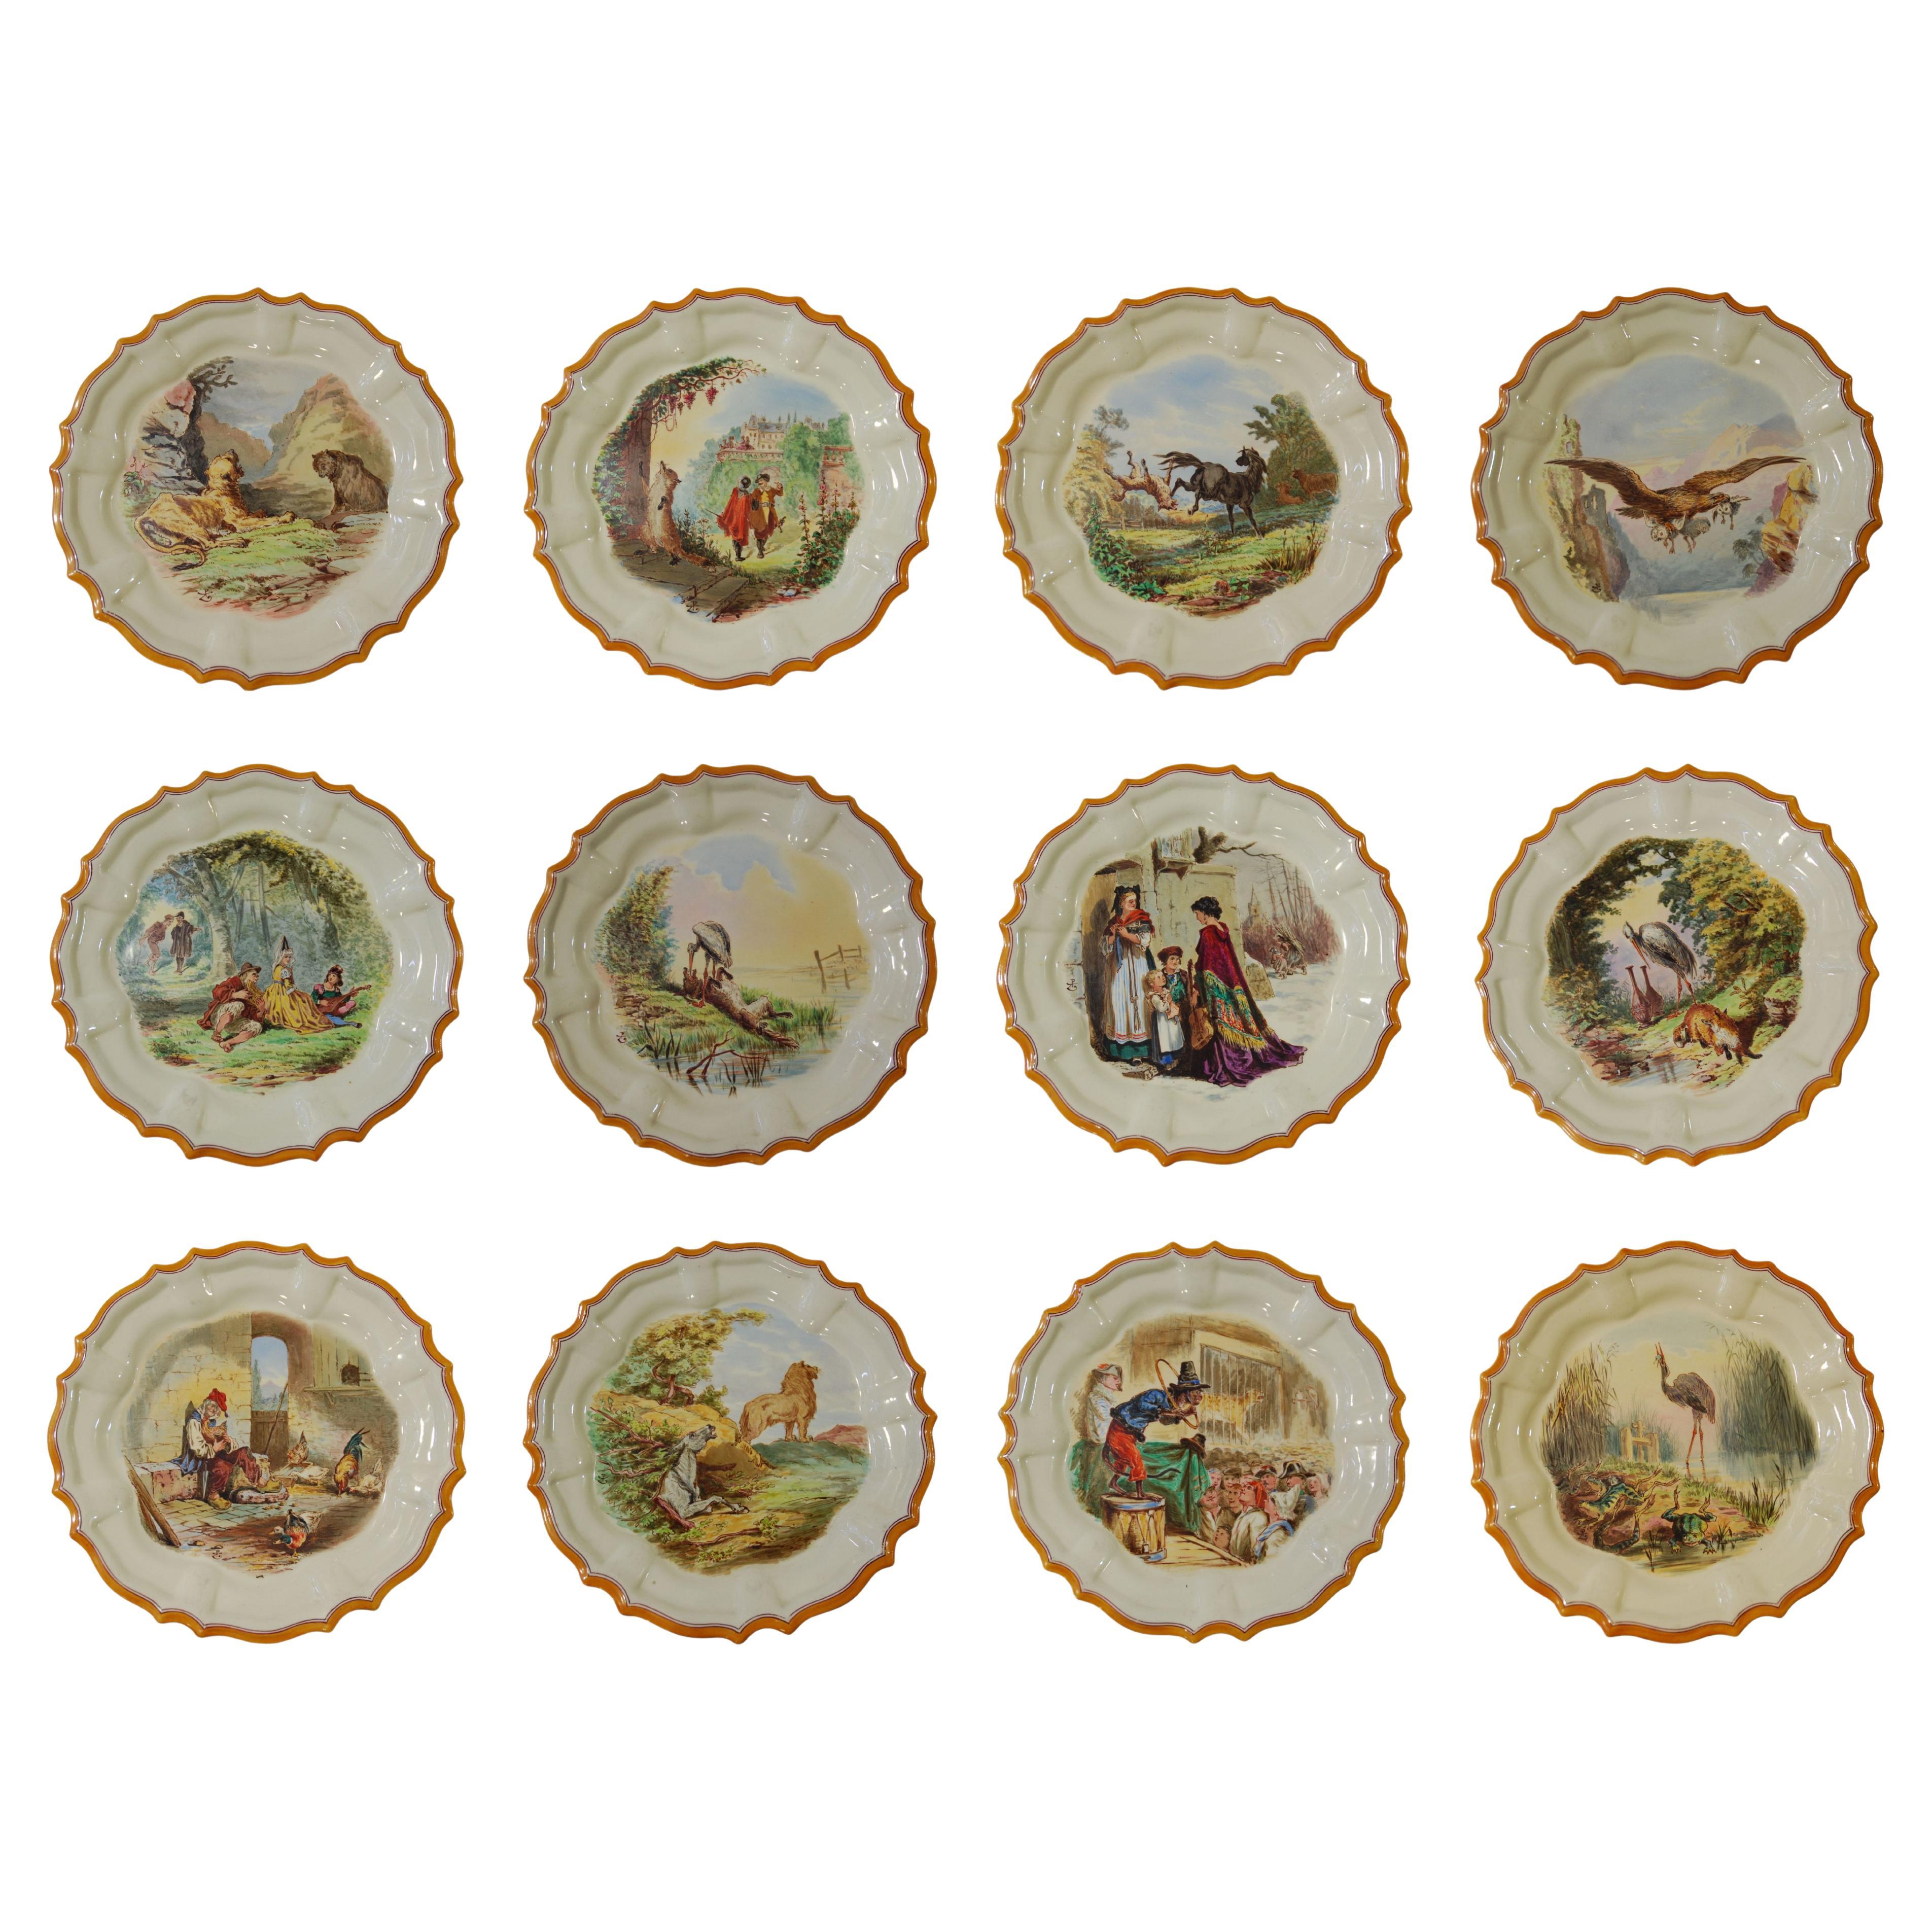 Set of 12 Plates, Aesop Fables, Wedgwood, circa 1860